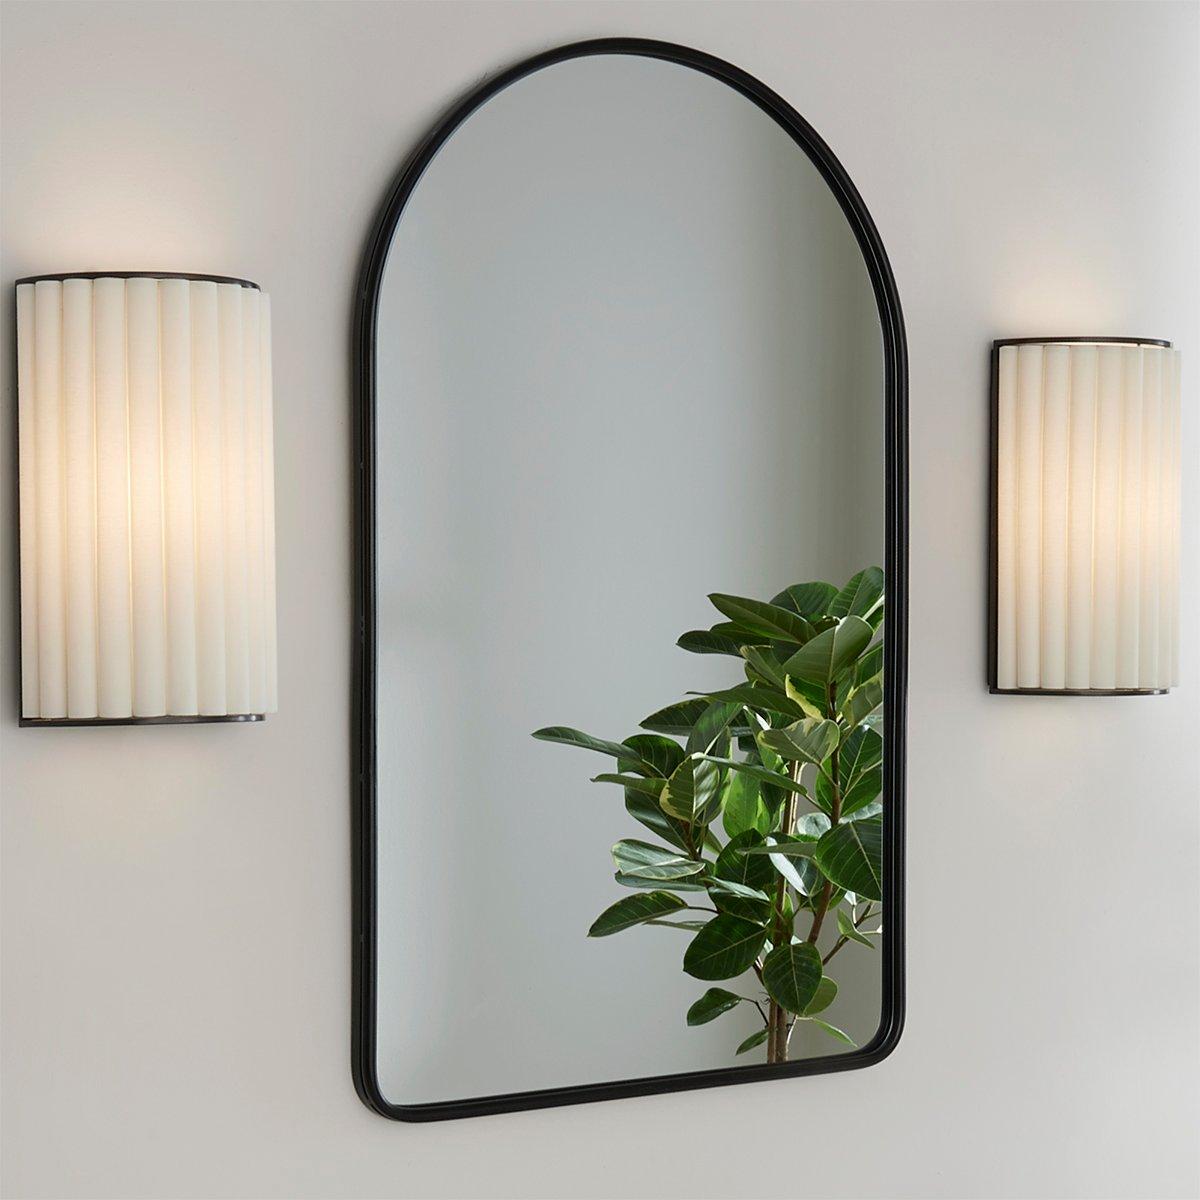 Simply Arched Mirror